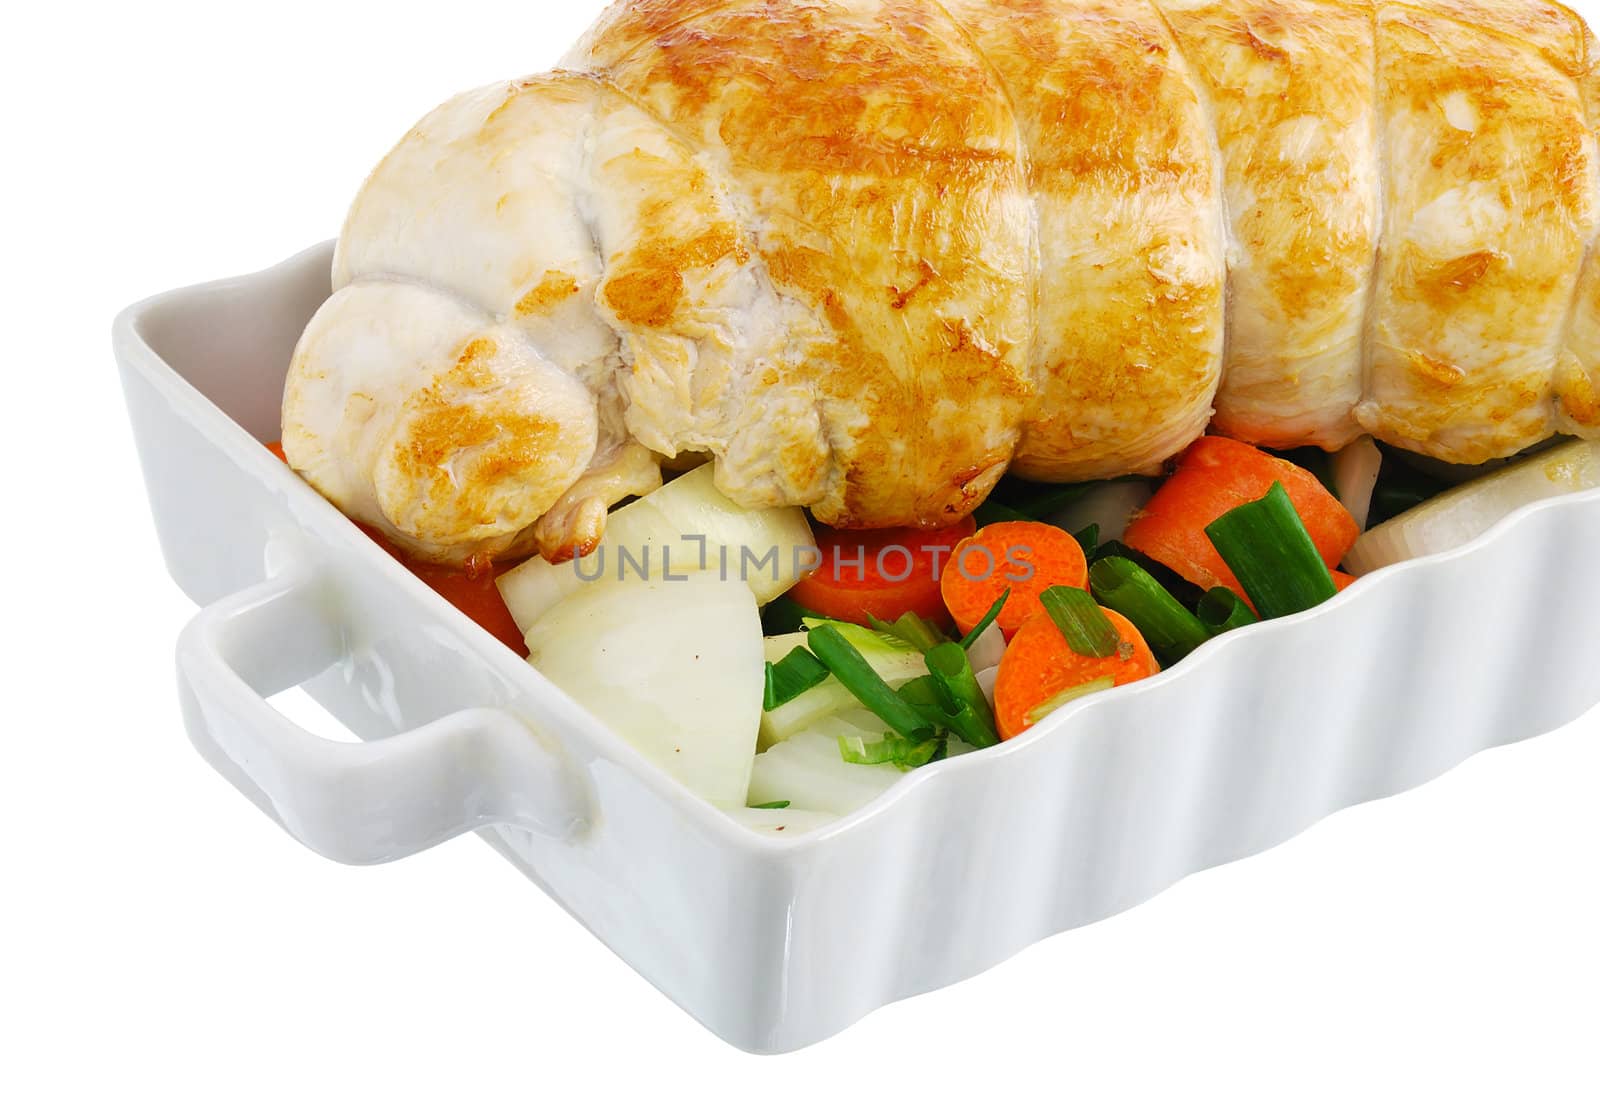 Crop of  grilled turkey breast with  vegetables on baking pan by vadidak